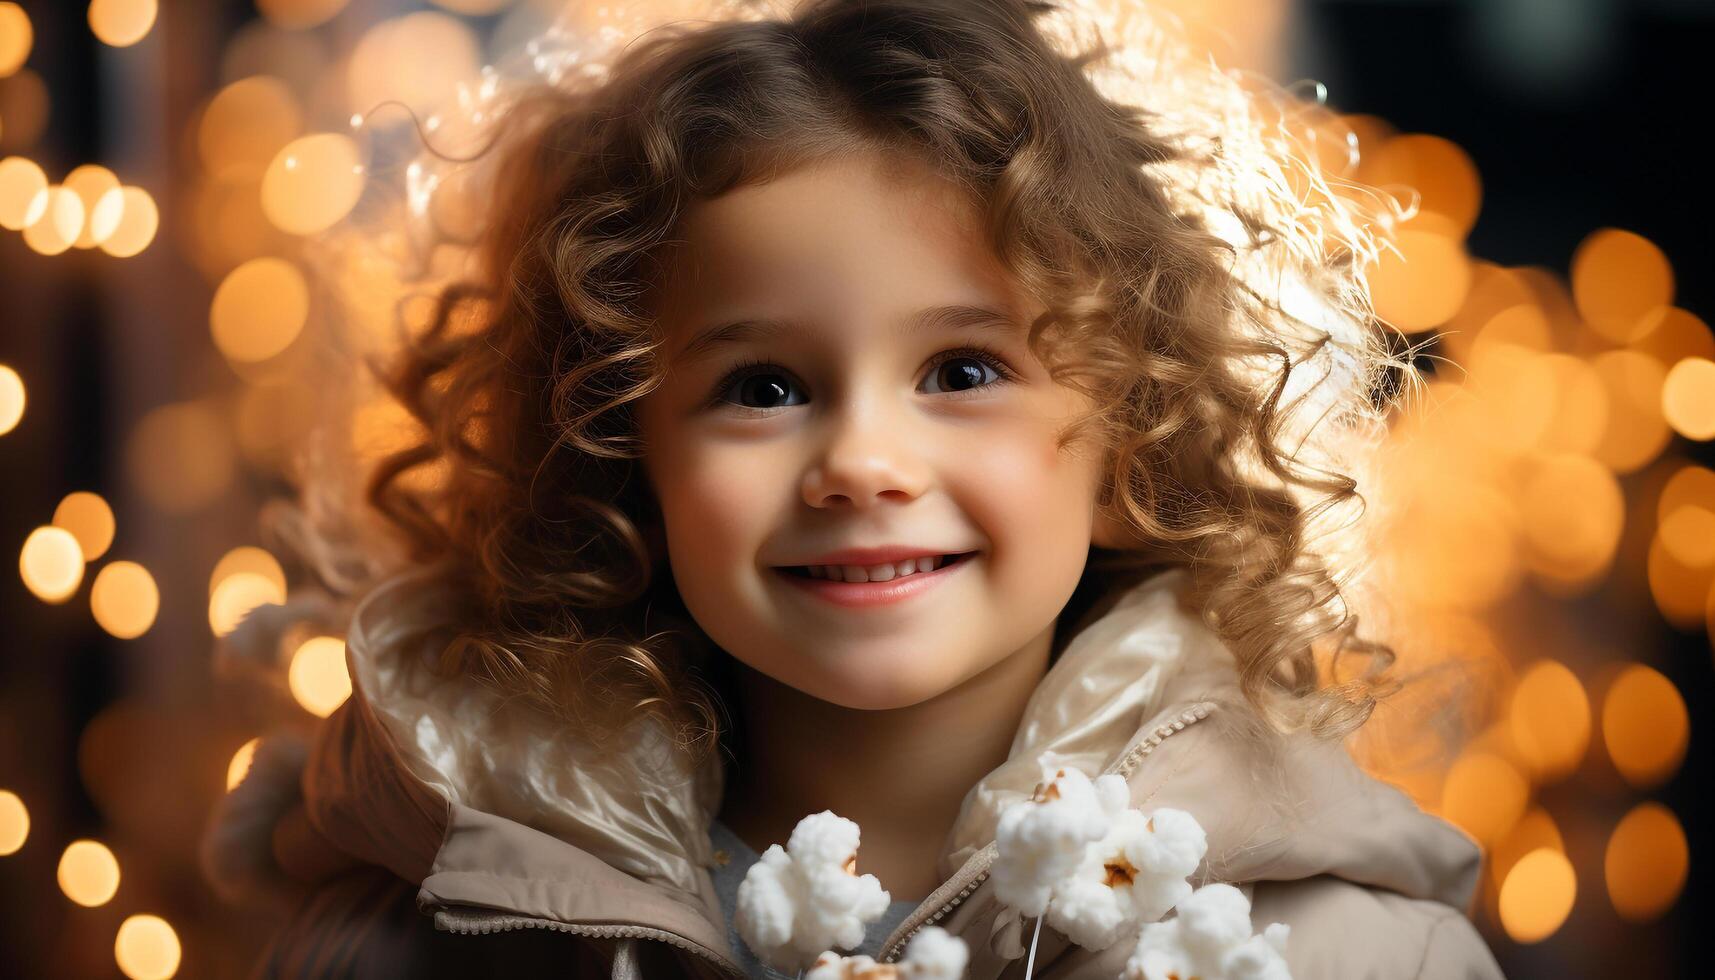 AI generated Smiling child, cheerful happiness, cute portrait, joyful outdoors celebration generated by AI photo